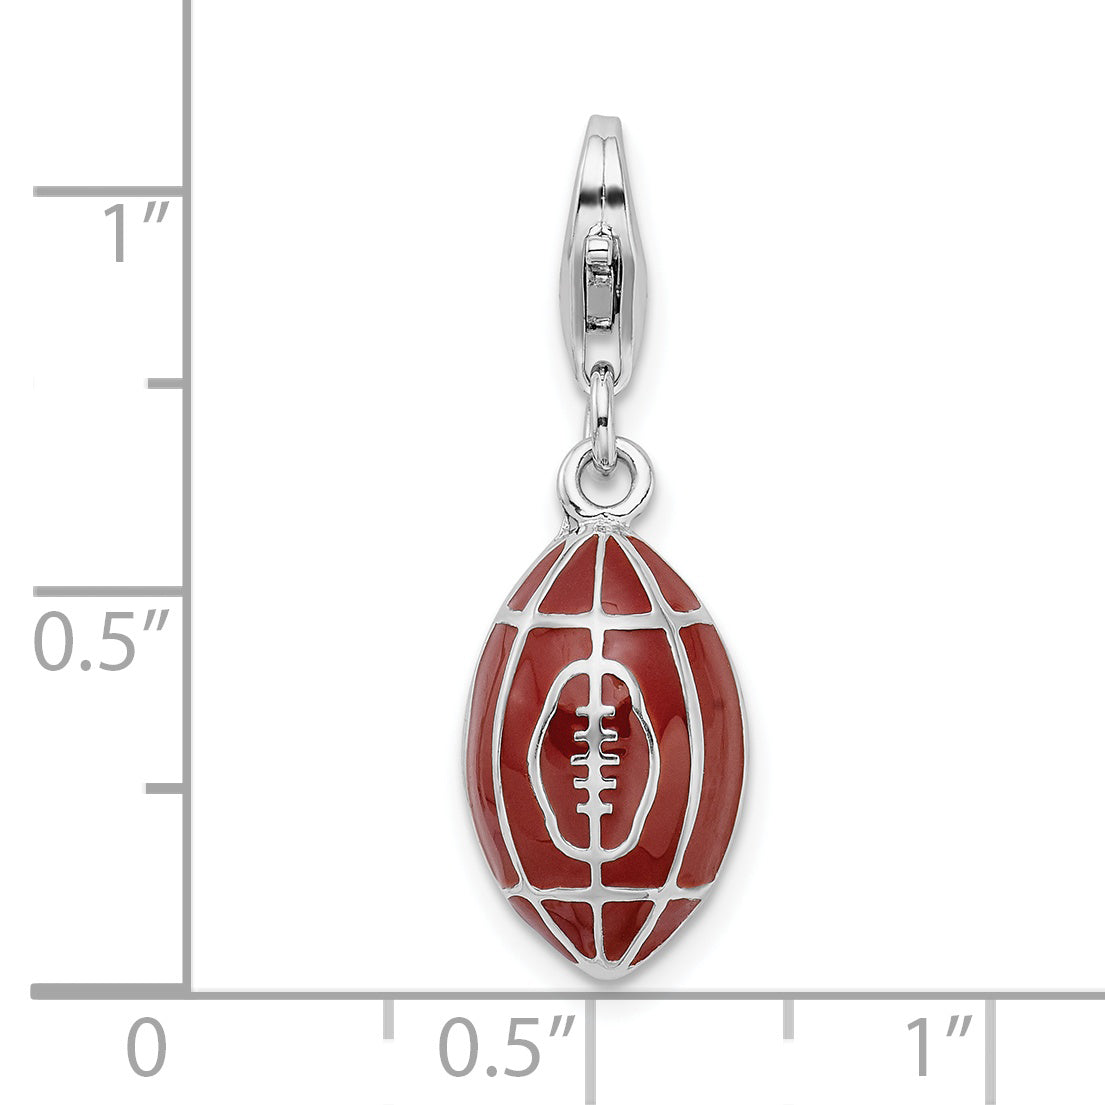 Amore La Vita Sterling Silver Rhodium-plated Polished 3-D Enameled Football Charm with Fancy Lobster Clasp